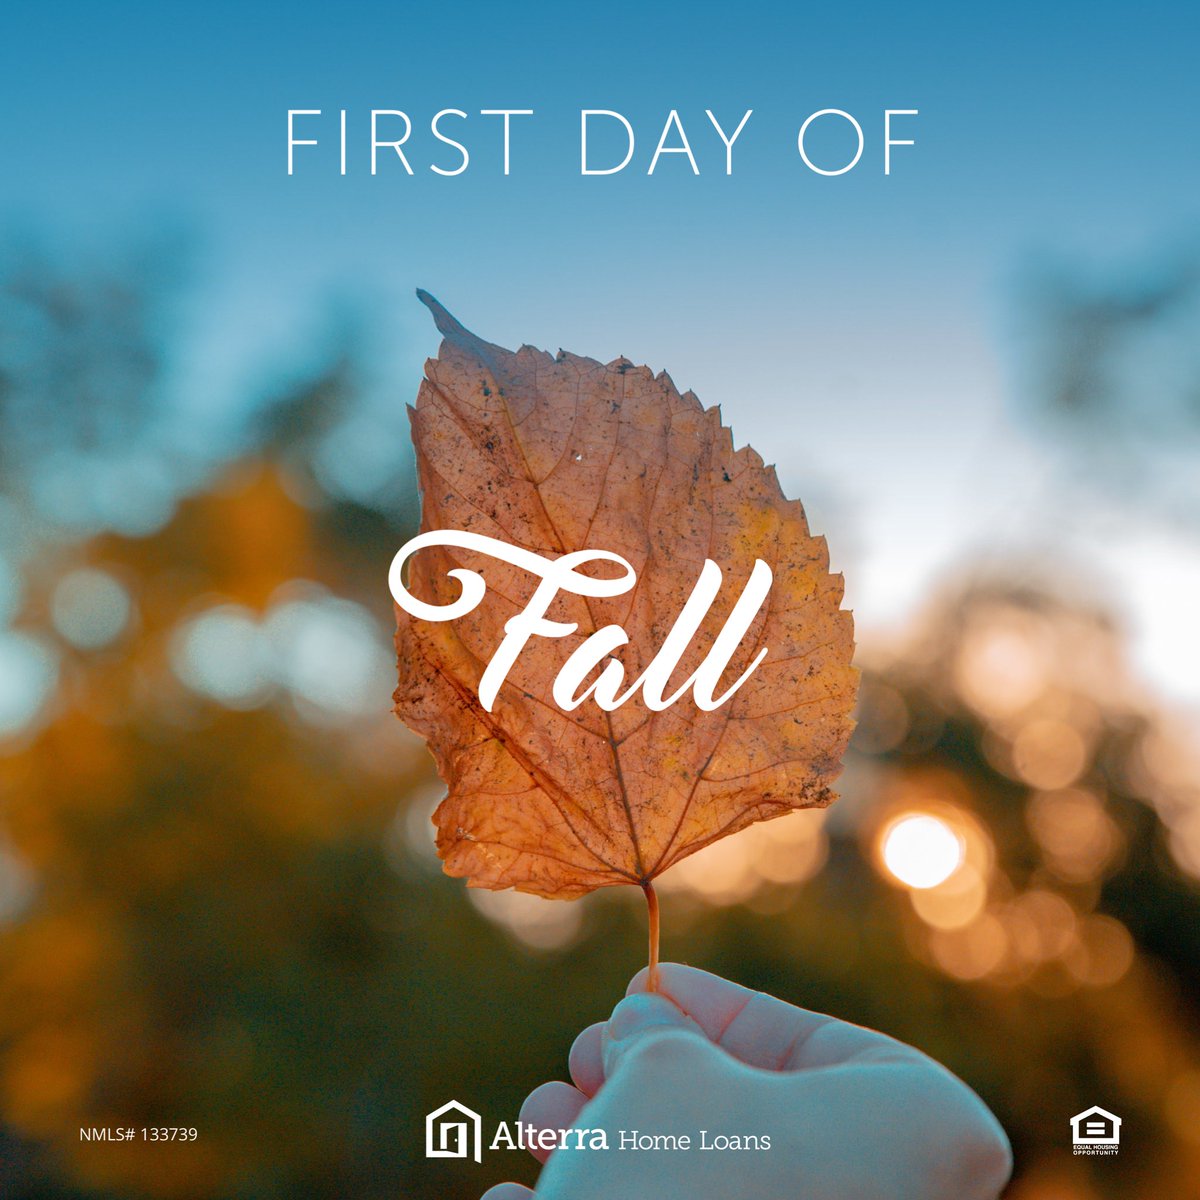 Happy First Day of Fall! How do you celebrate the first day of Fall? Ours involves helping our sales team get their clients the house of their dreams while sipping a Pumpkin Latte! #Fall #mortgage #refi #WEAREALTERA